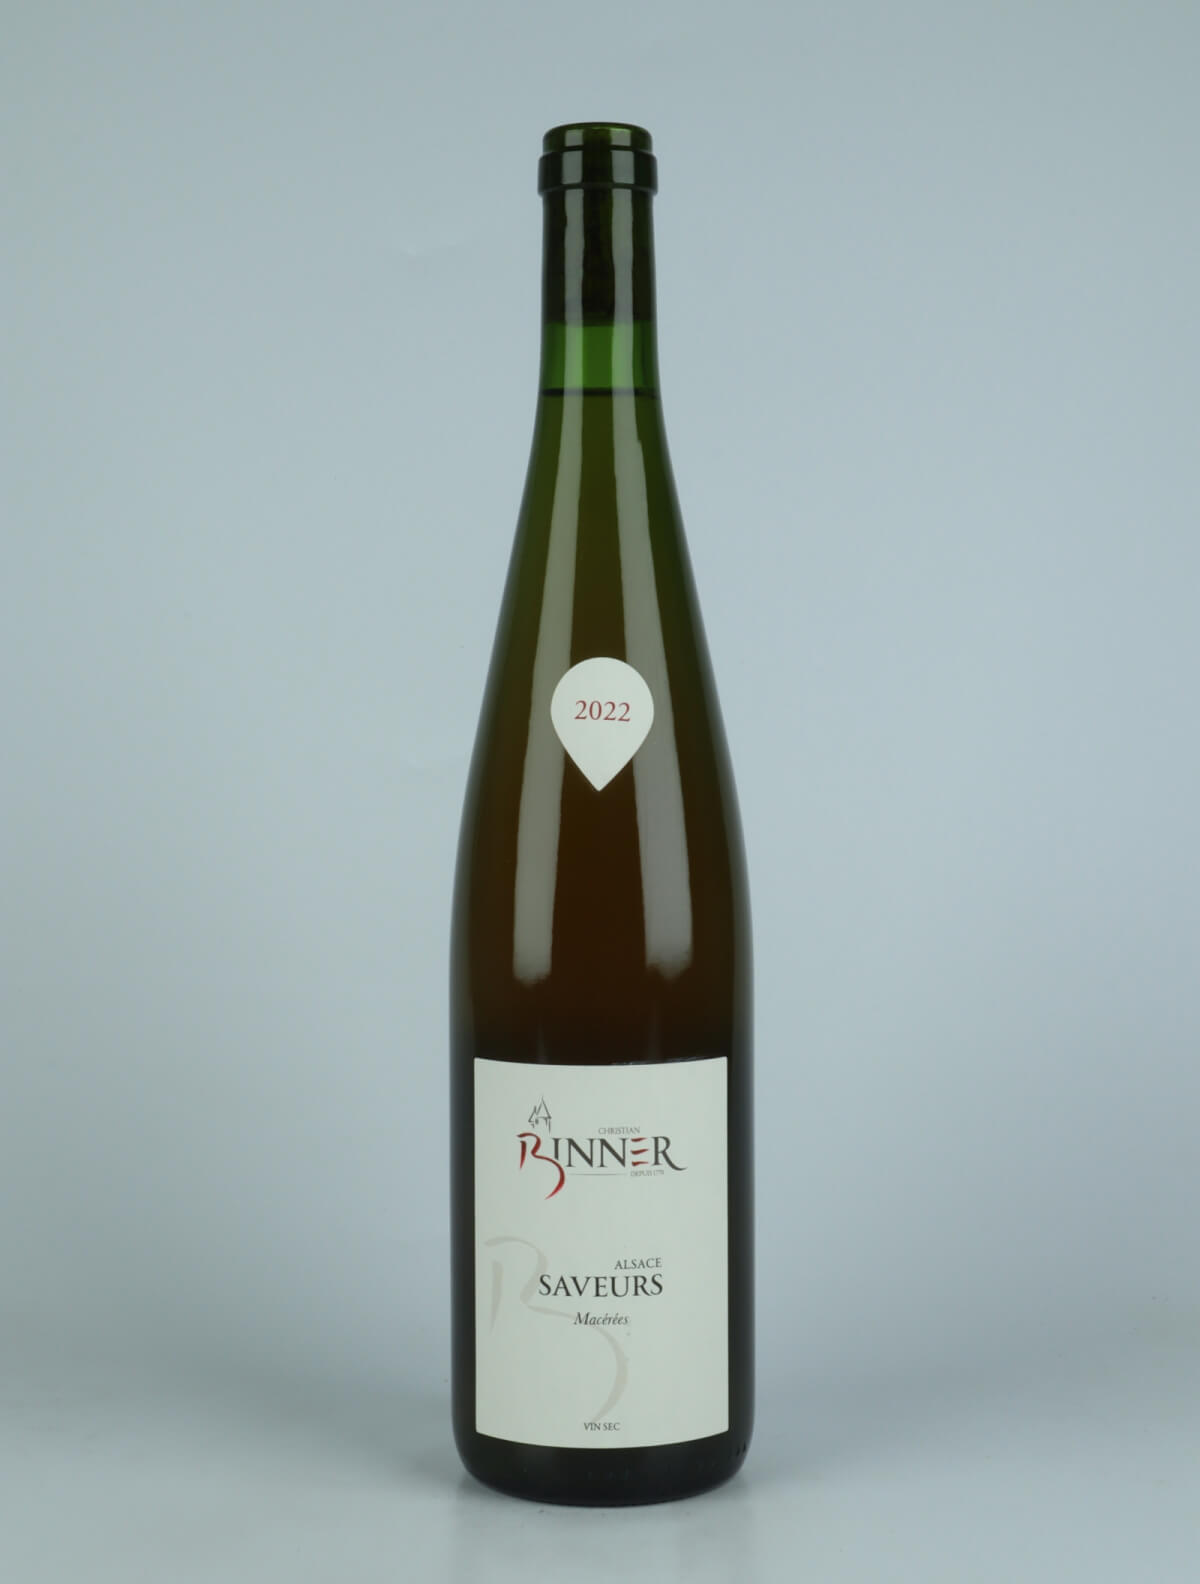 A bottle 2022 Saveurs Macérées Orange wine from Domaine Christian Binner, Alsace in France